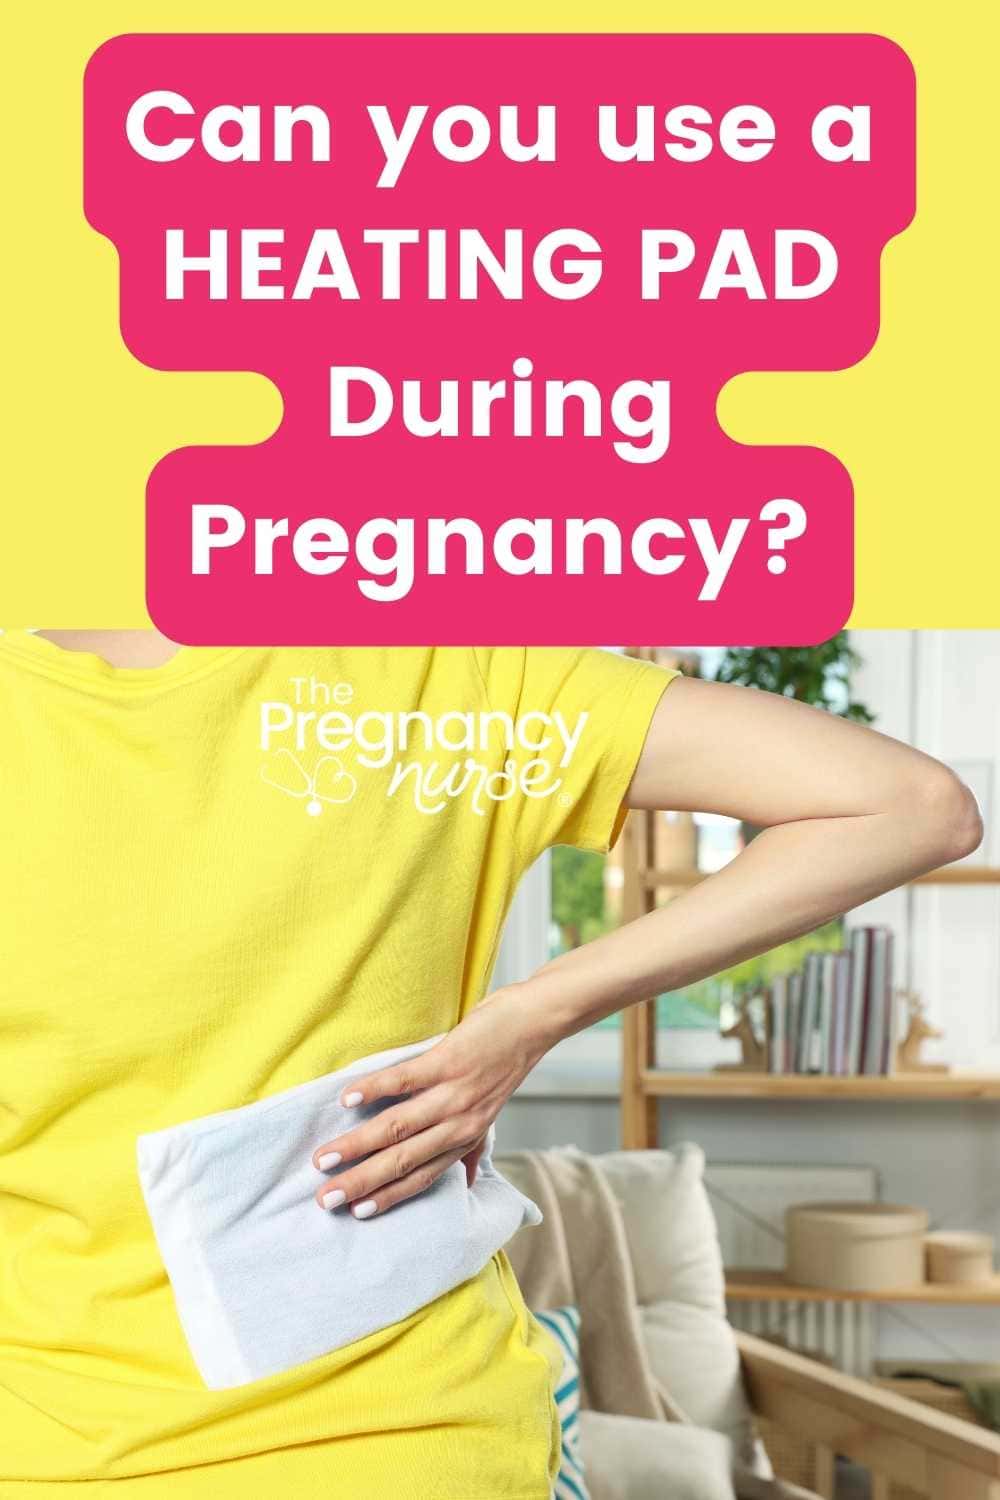 Is using a heating pad safe during pregnancy. Using heat can be a simple way to resolve pregnancy-related aches and pains in your hips, back, and joints. But, should you avoid it so that it doesn't raise a woman's body temperature? Come let this L&D nurse tell you! via @pullingcurls